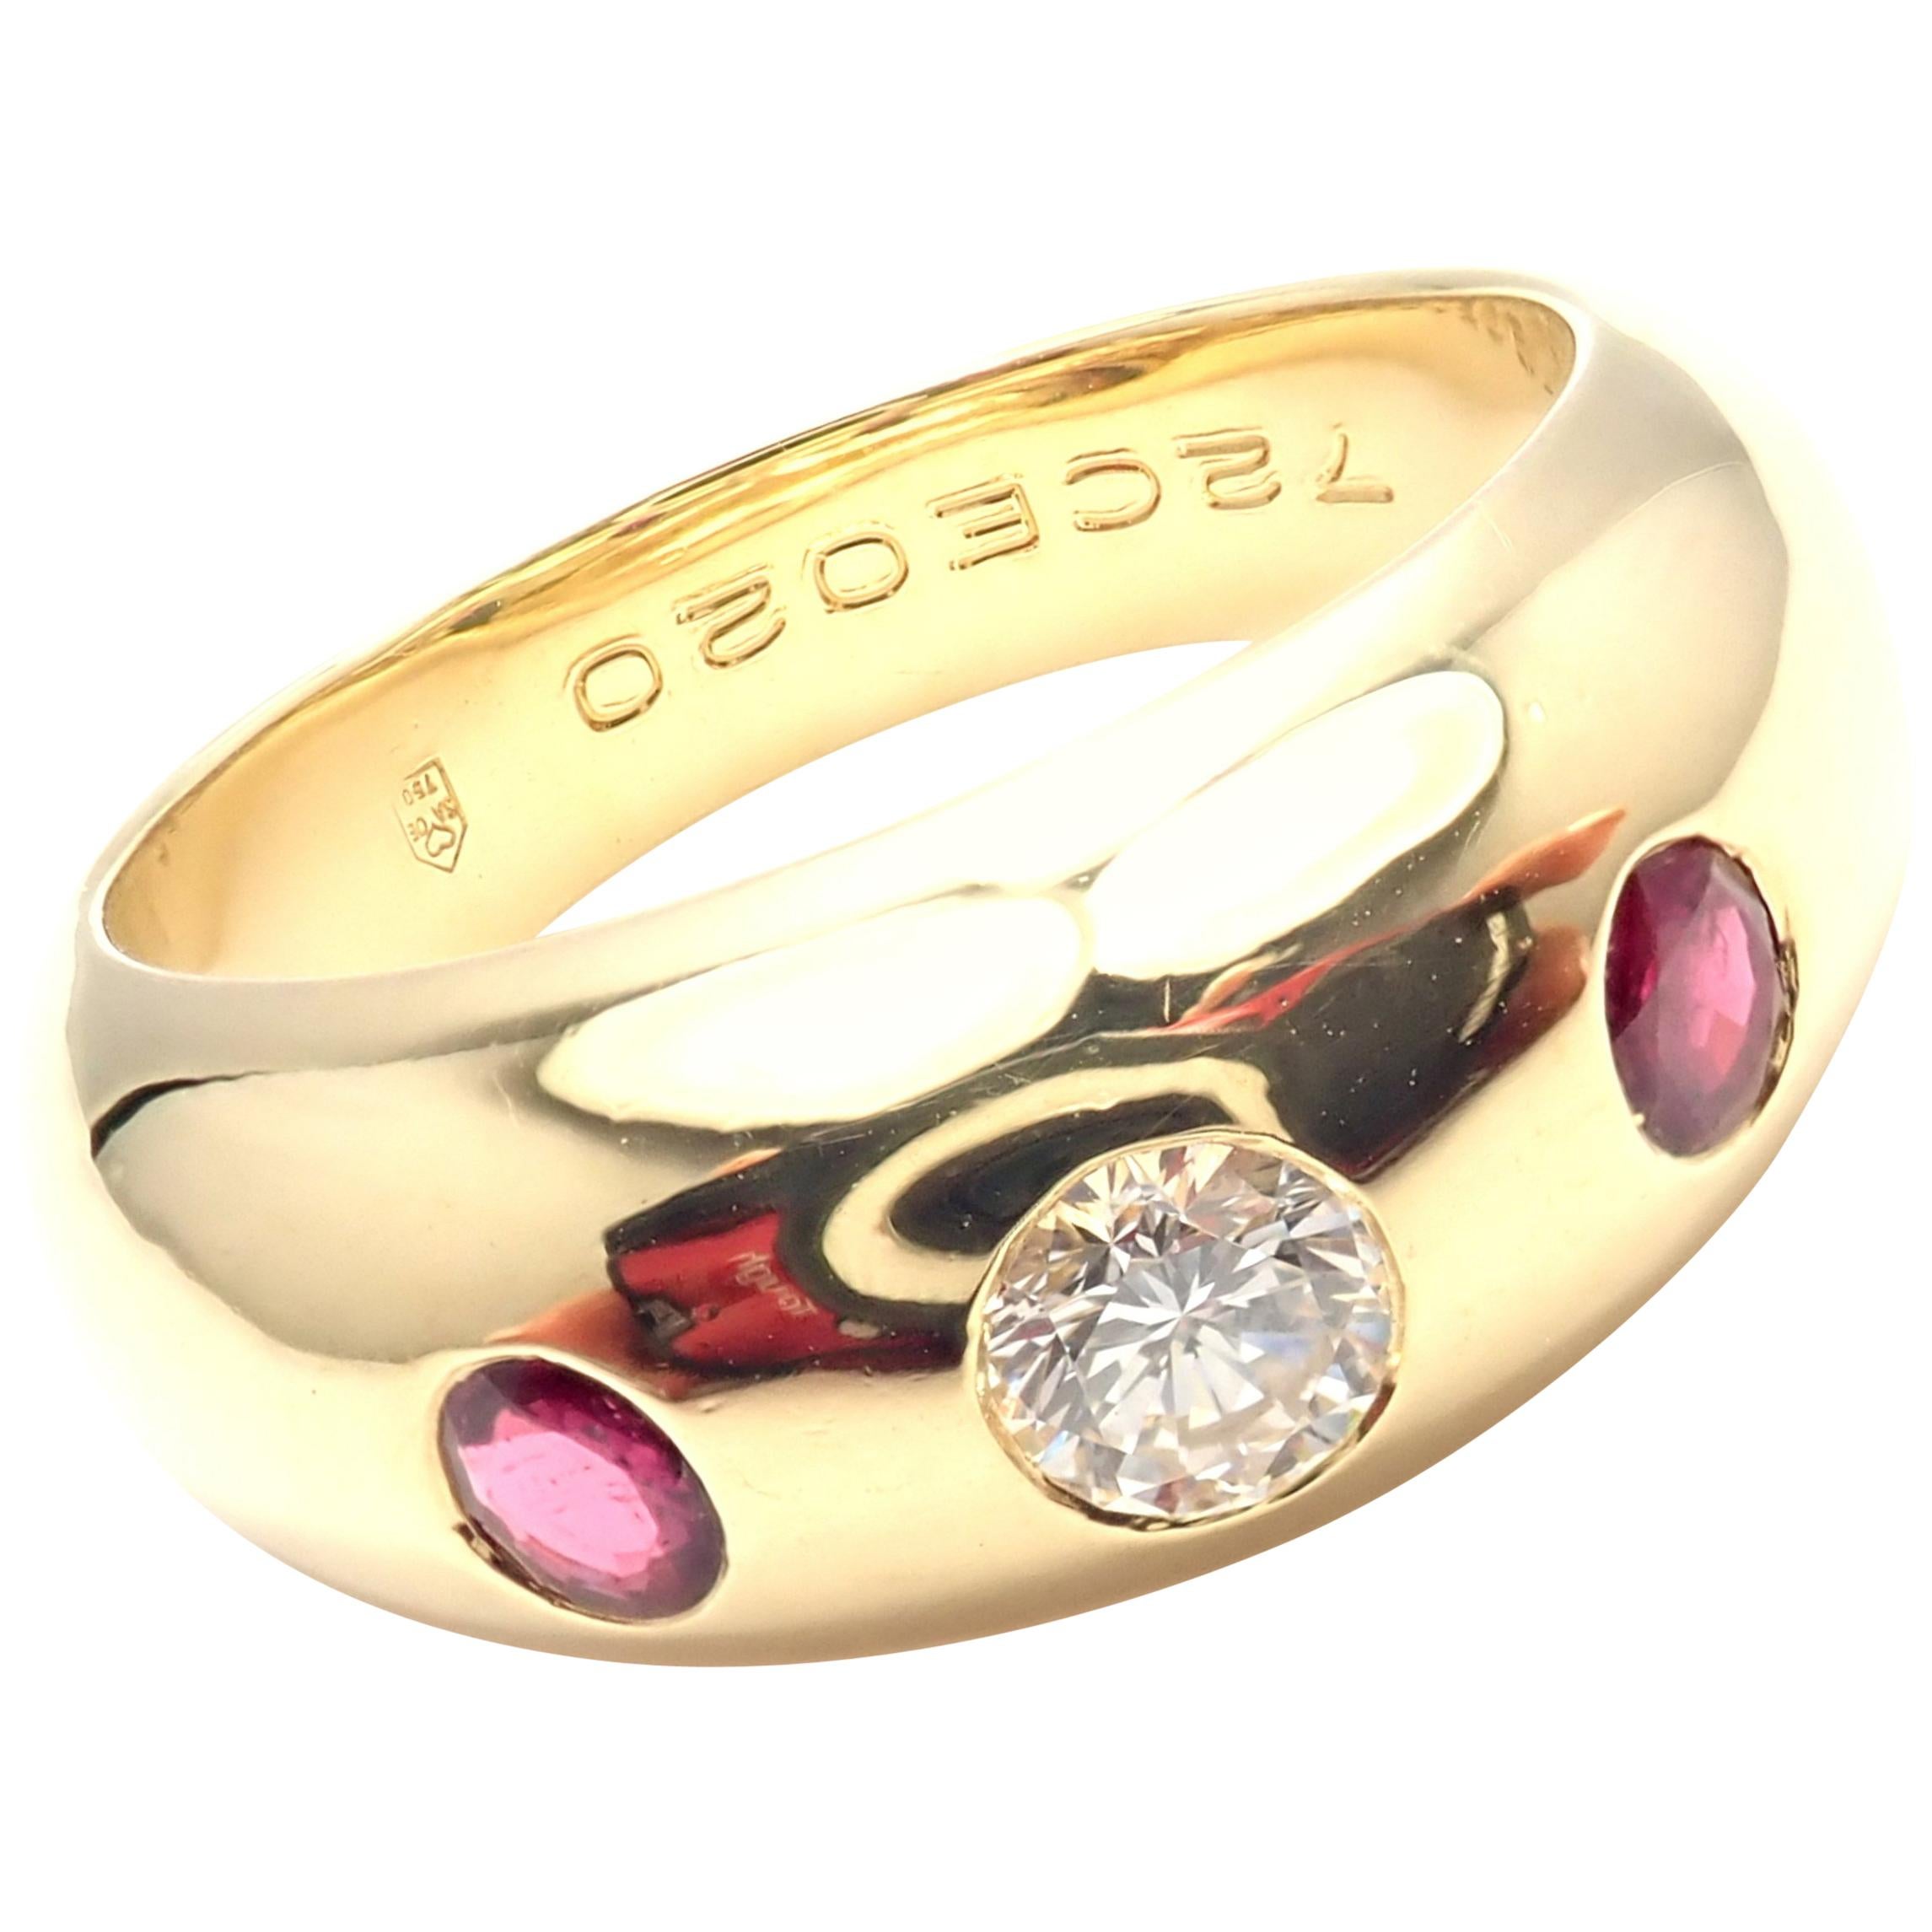 Cartier Diamond Center Ruby Yellow Gold Band Ring